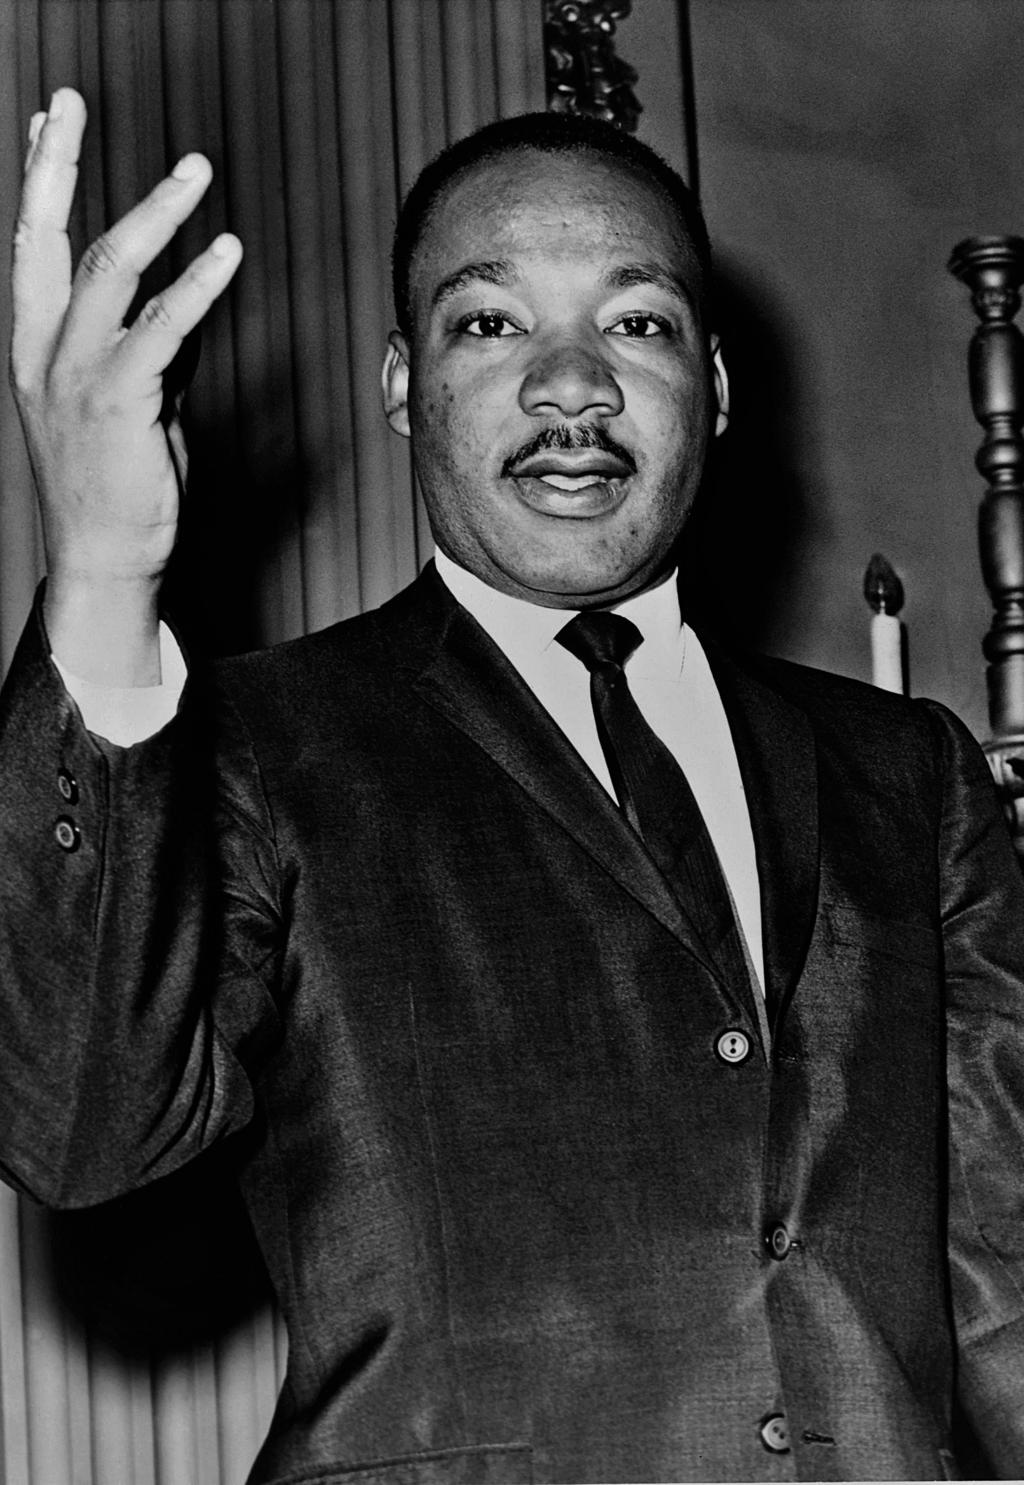 HONORING MARTIN LUTHER KING JR.